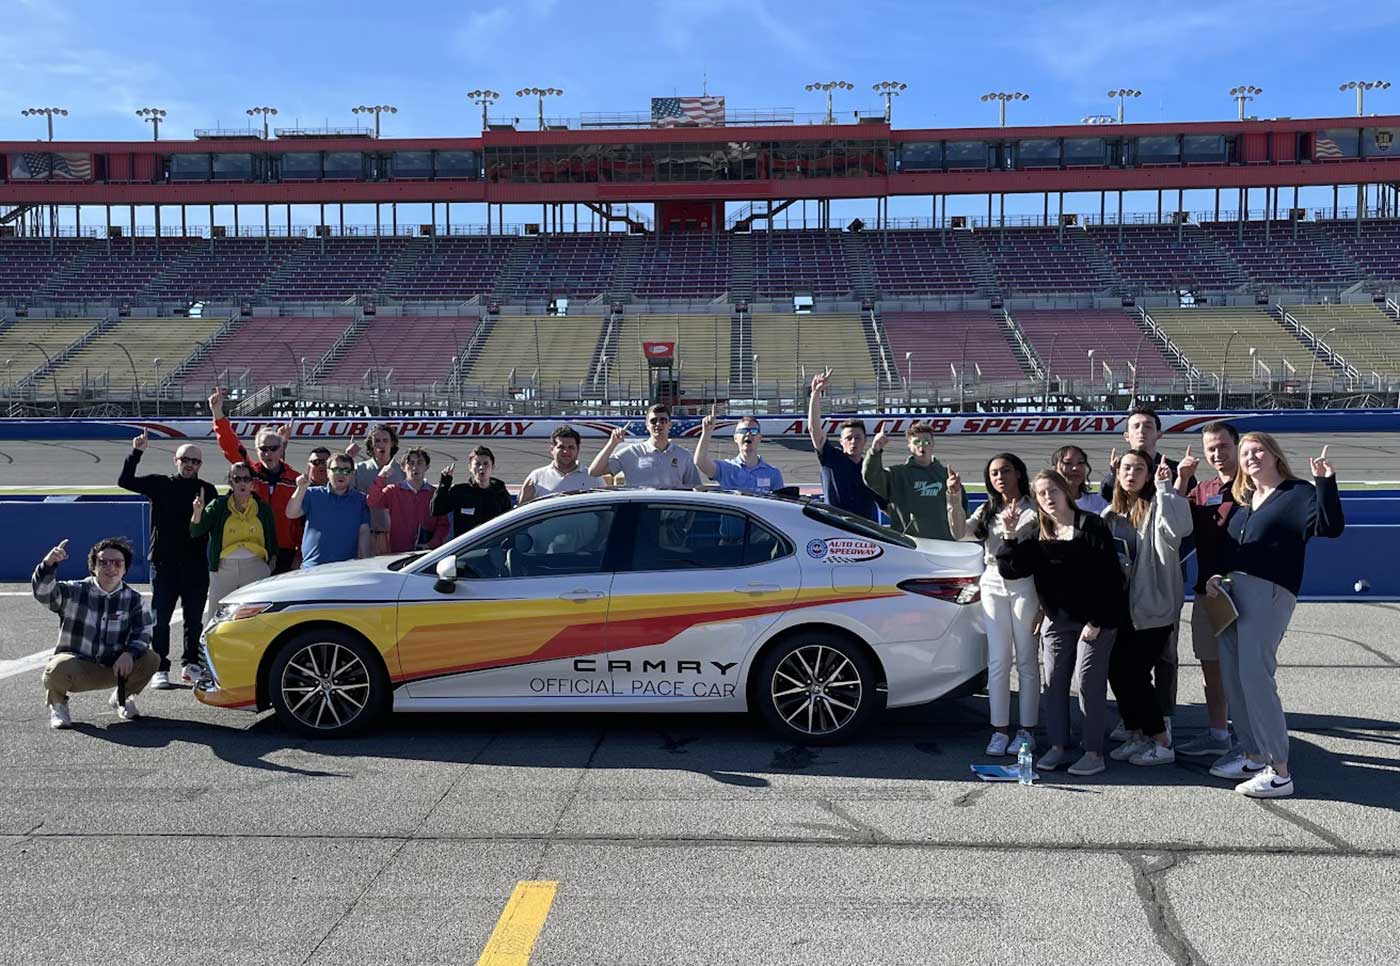 A large group is posed with a NASCAR pace car on a track